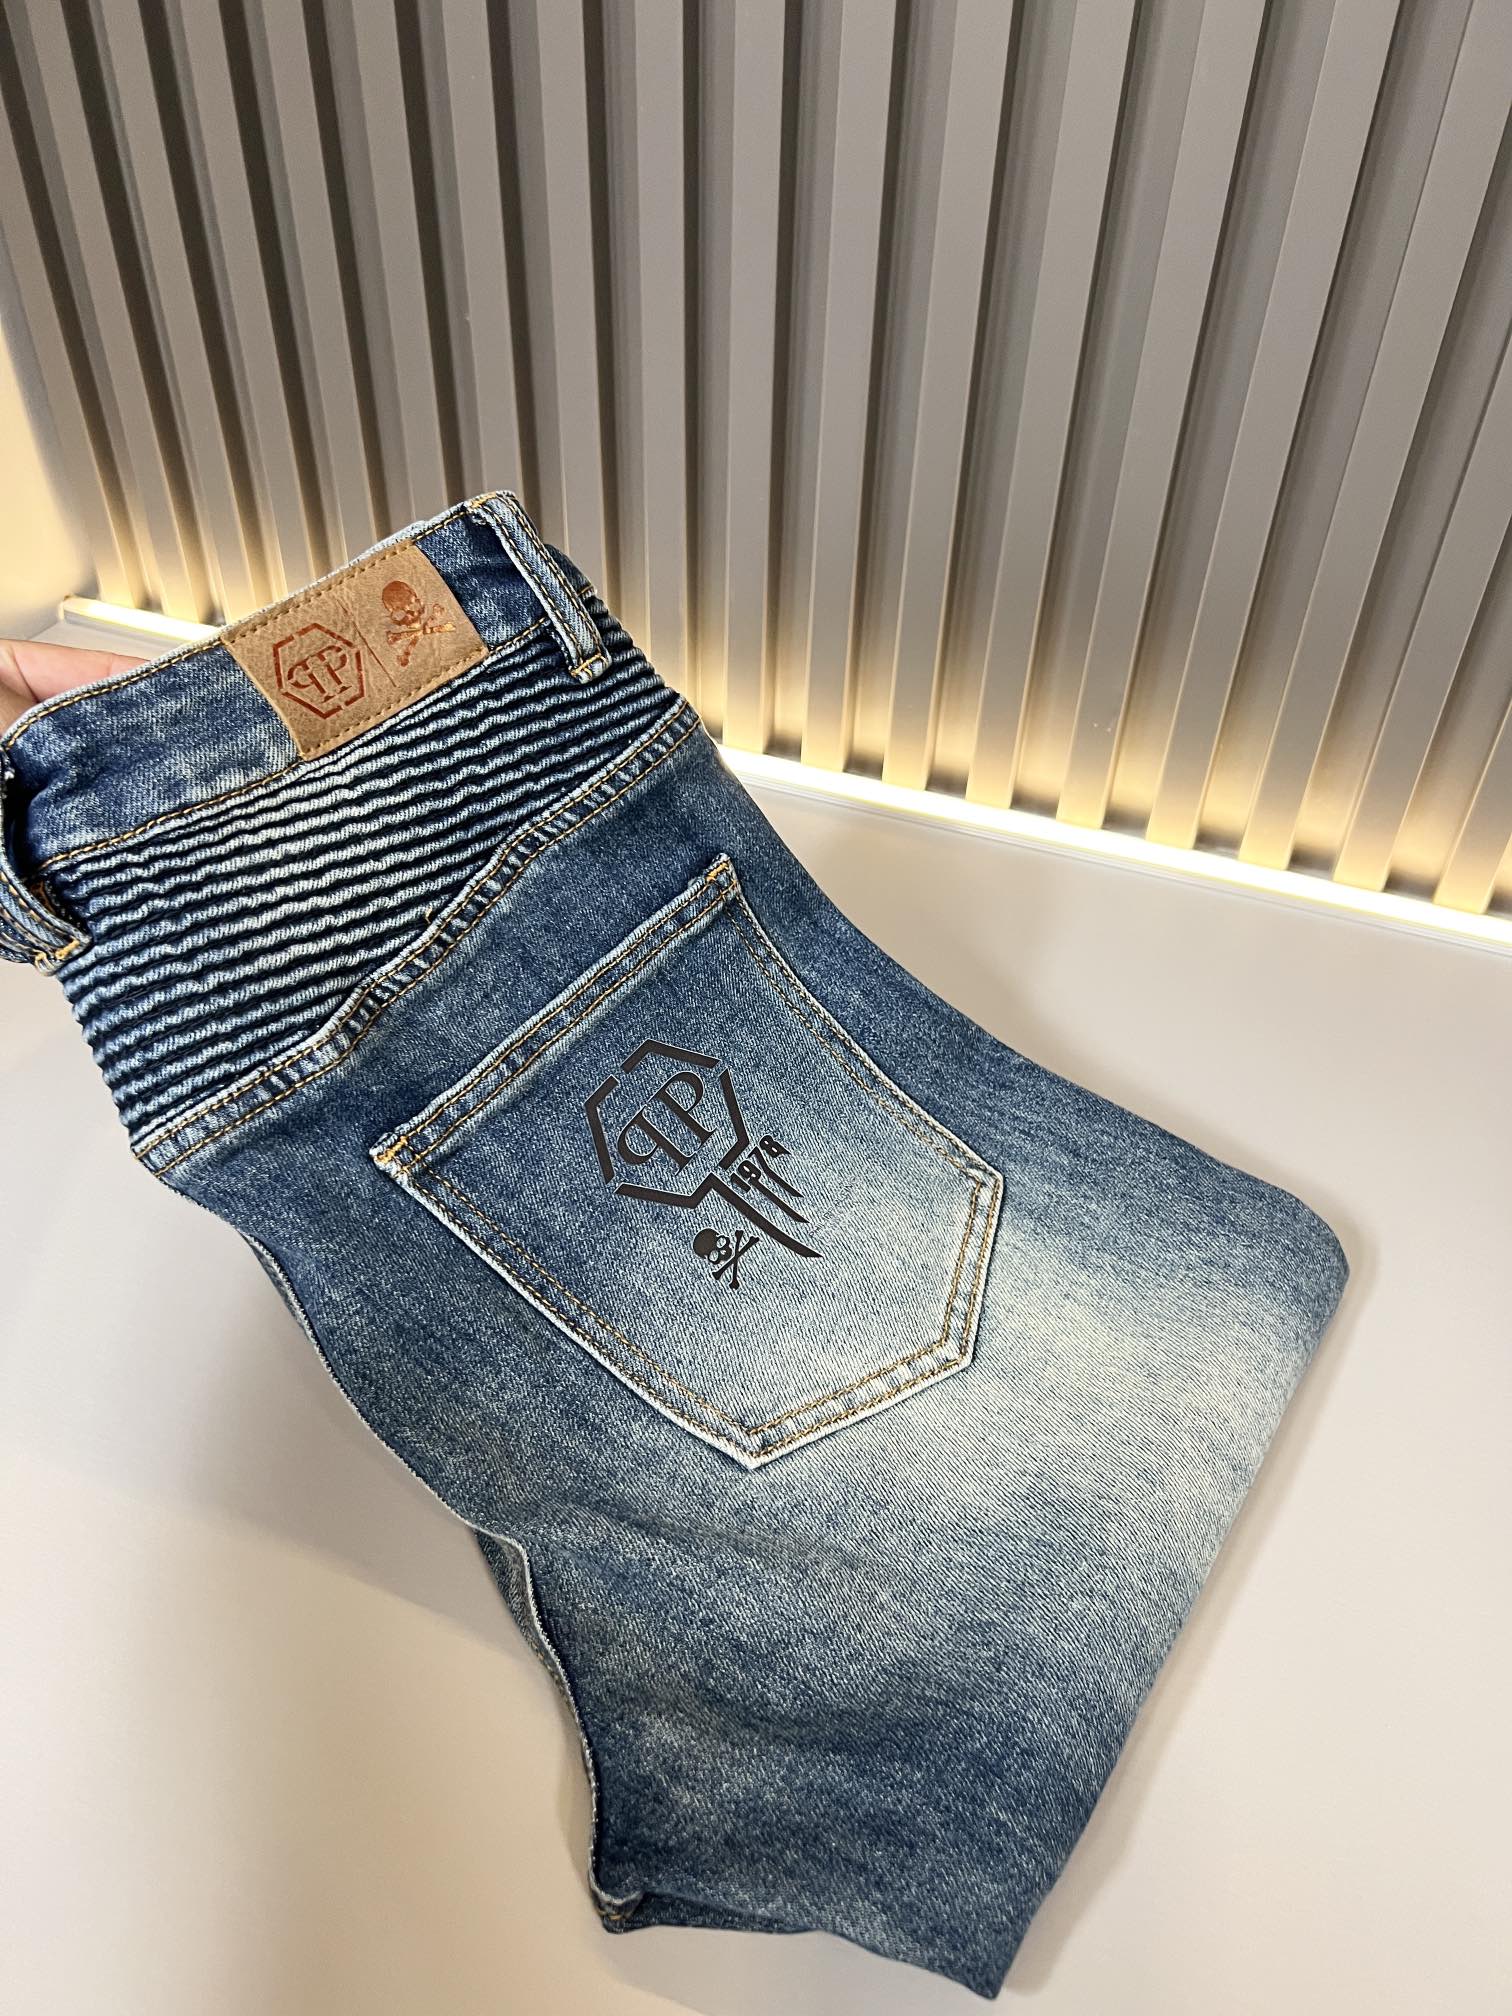 Philipp Plein Clothing Jeans Top Perfect Fake
 Fall/Winter Collection Fashion Casual